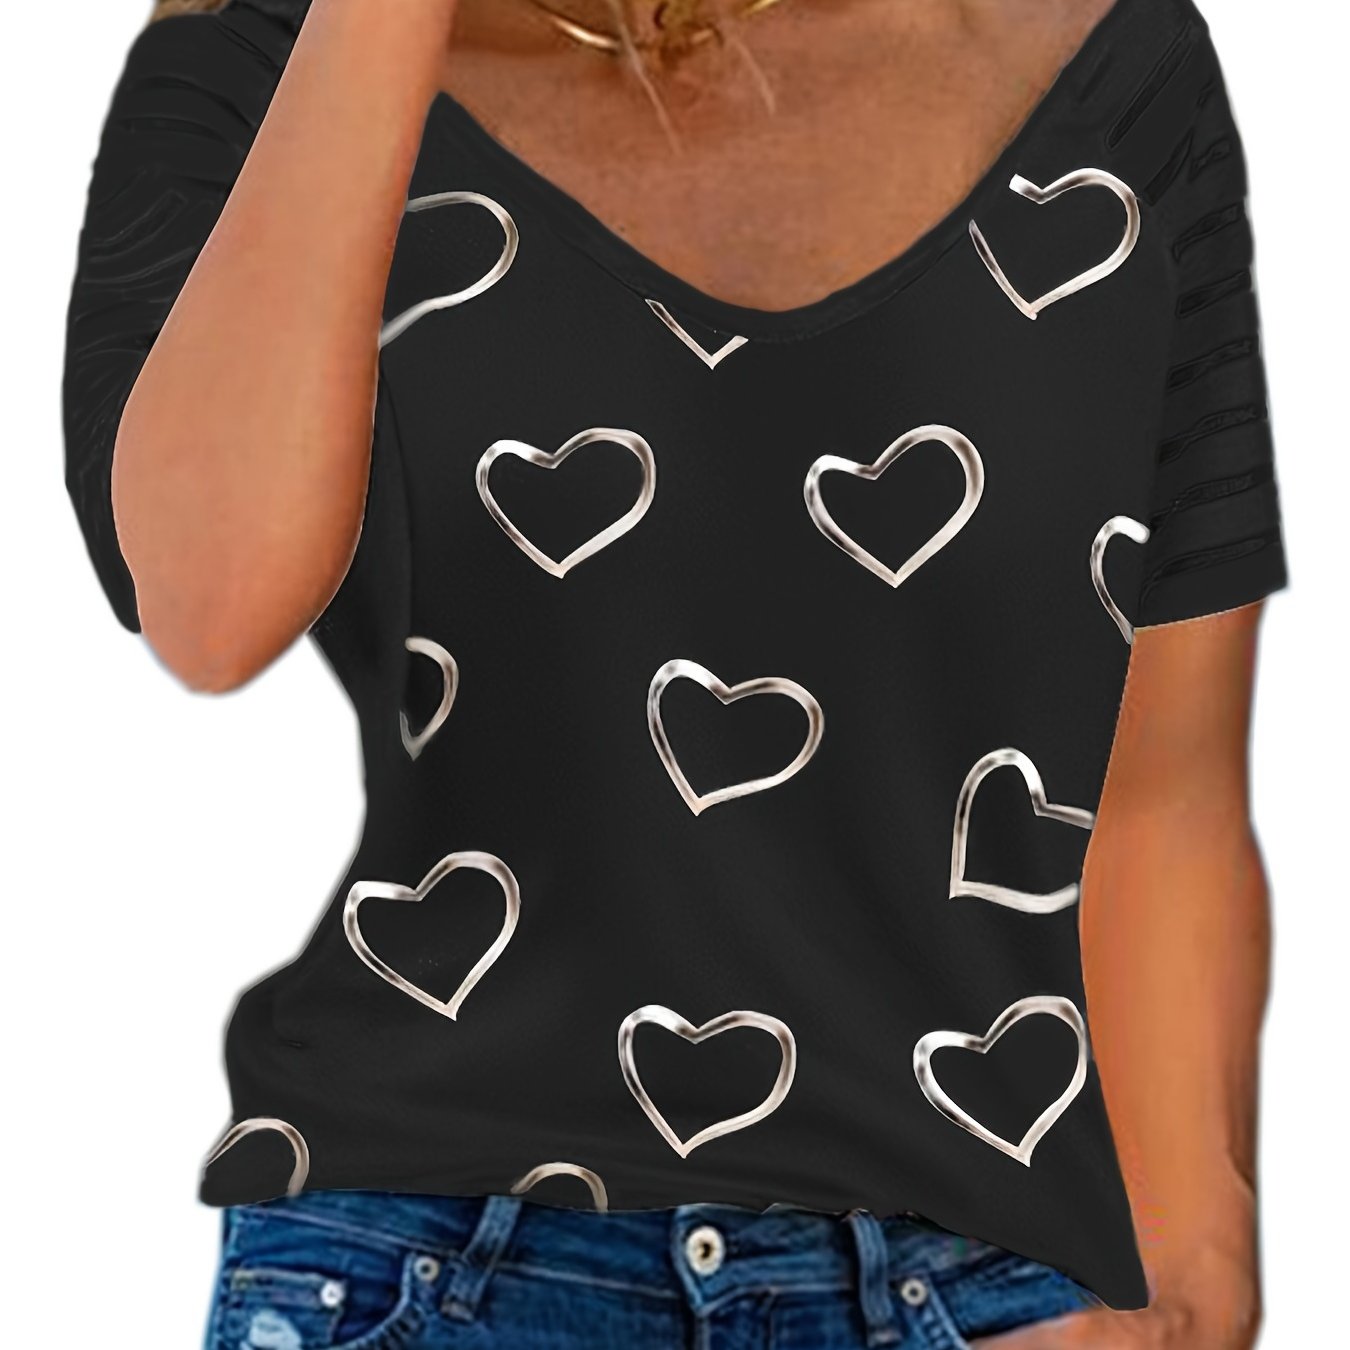 Heart Print Striped T-Shirt, Crew Neck Short Sleeve T-Shirt, Casual Every Day Tops, Women's Clothing RA1012